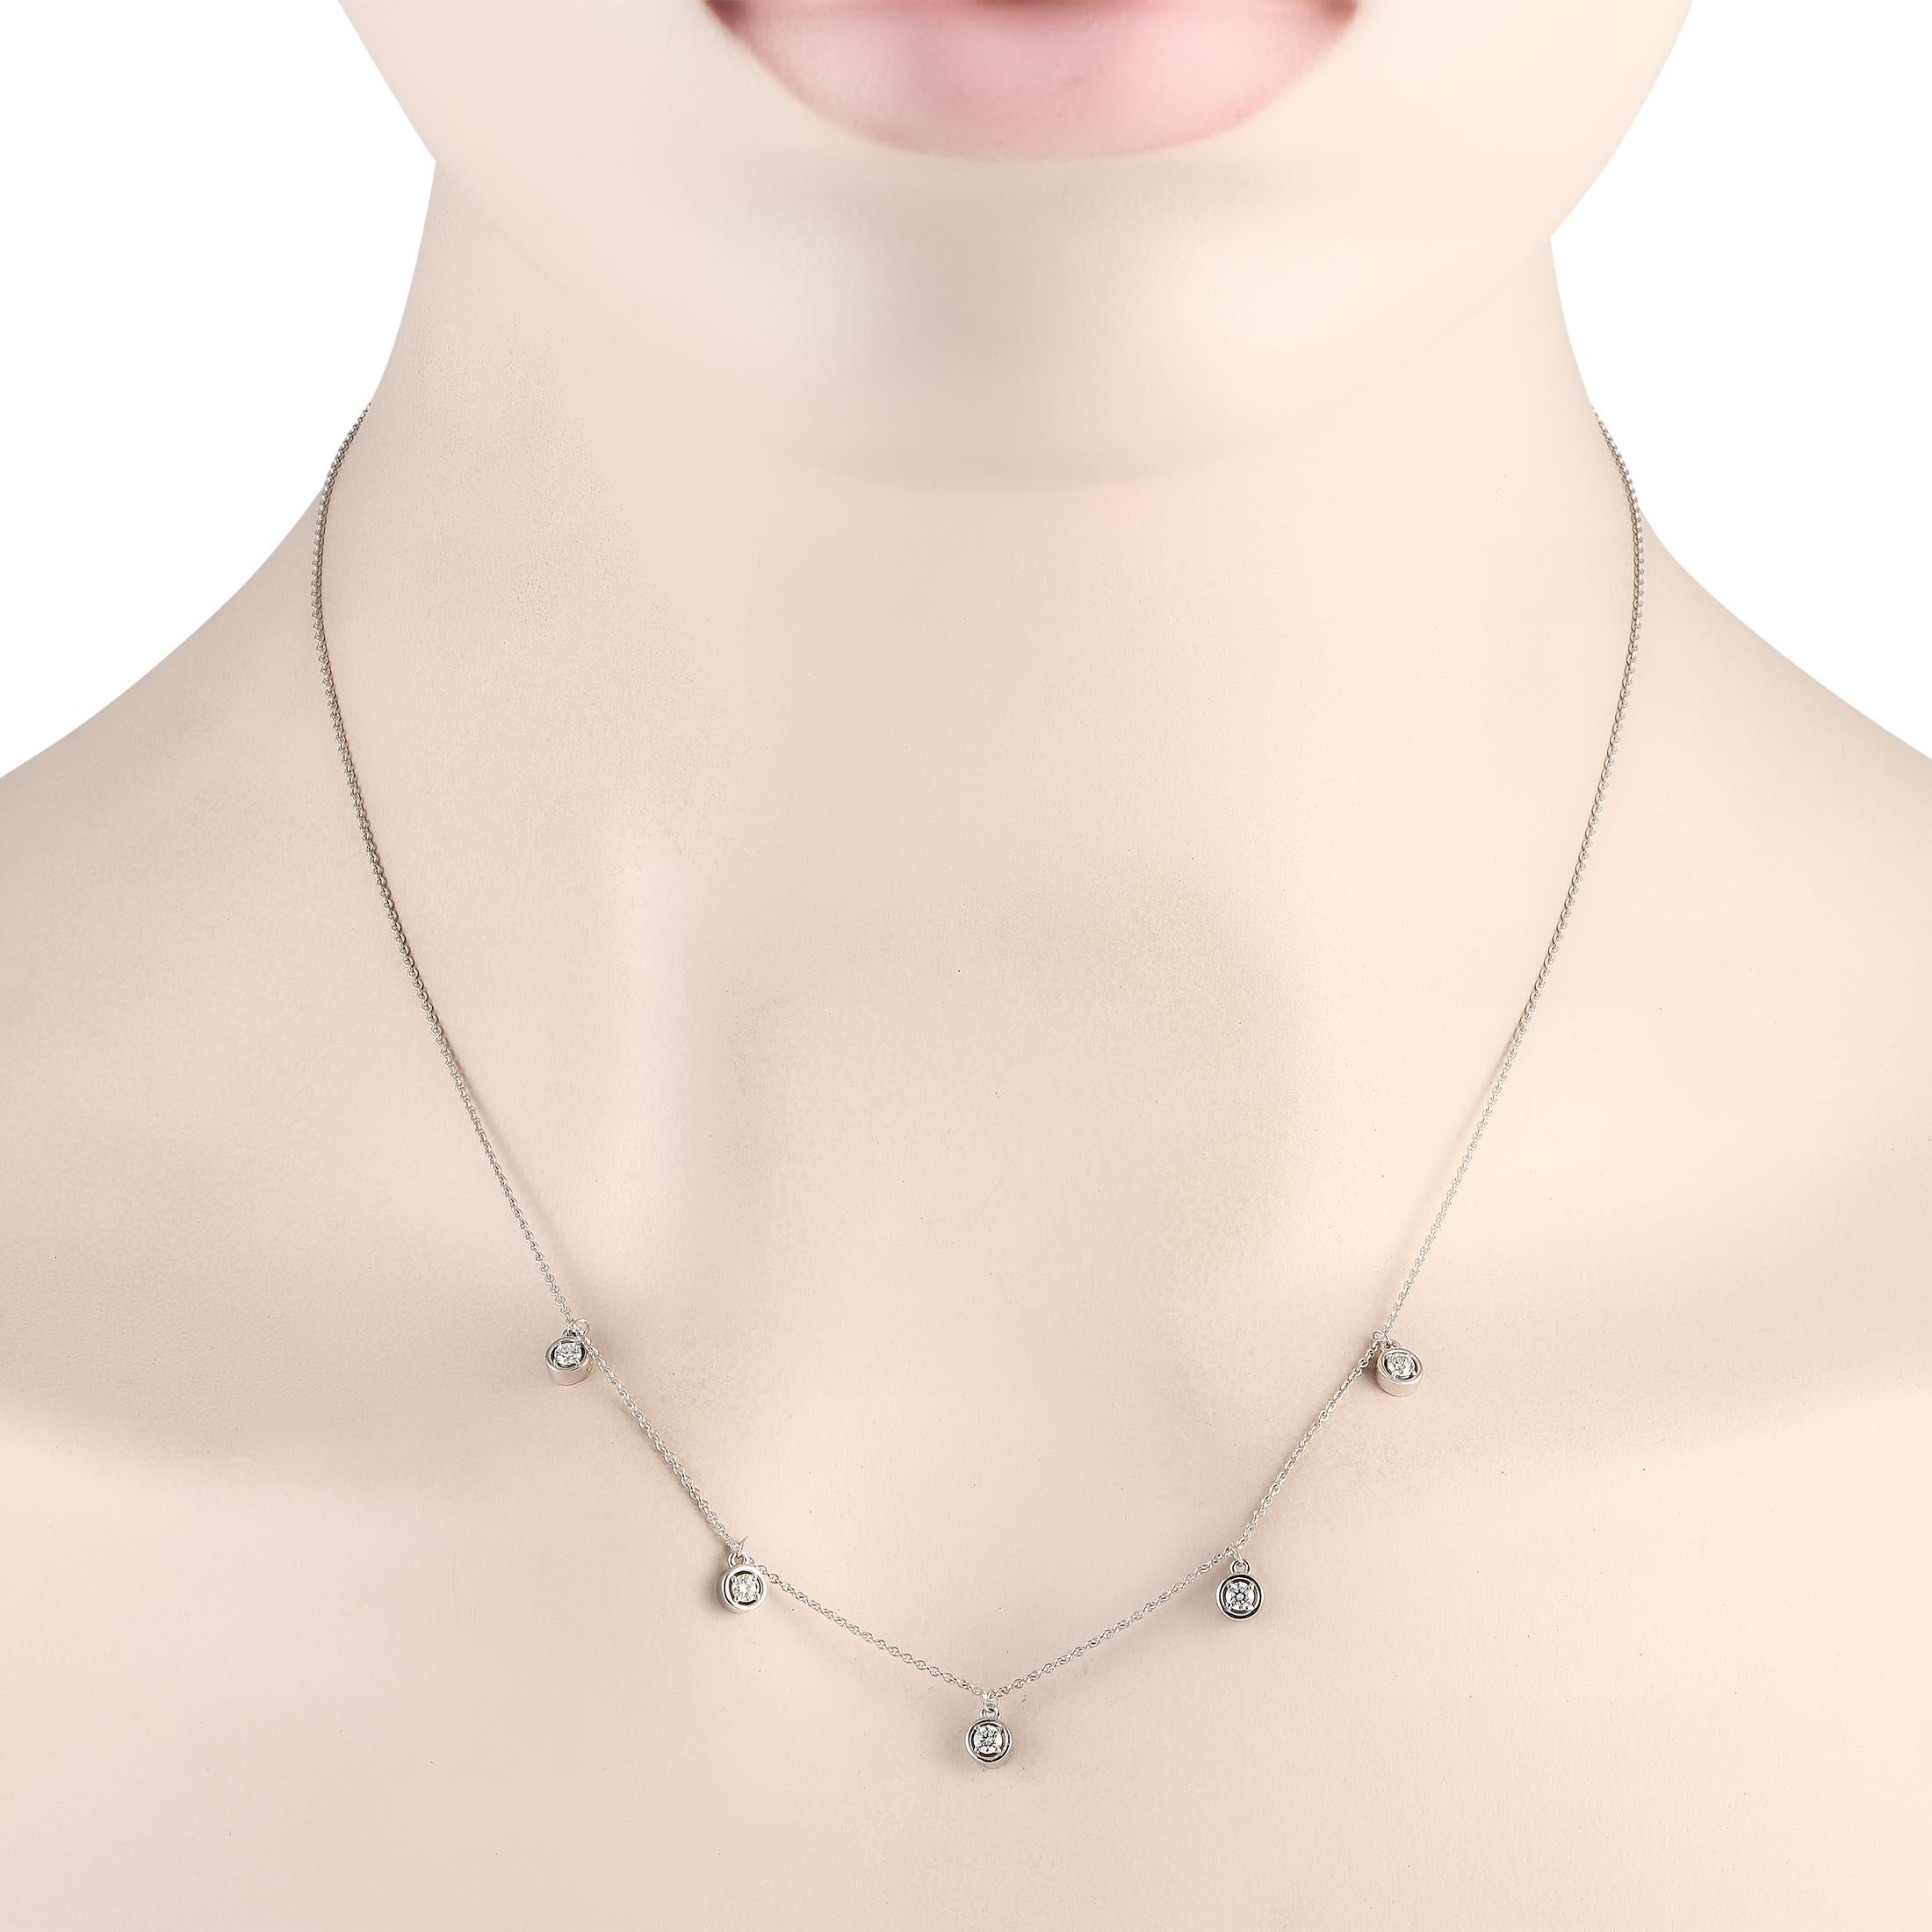 A series of bezel-set Diamonds with a total weight of 0.25 carats give this chic necklace its distinct sense of understated elegance. Ideal for everyday wear, this exquisite accessory is crafted from 14K white gold and features an 18 chain.This